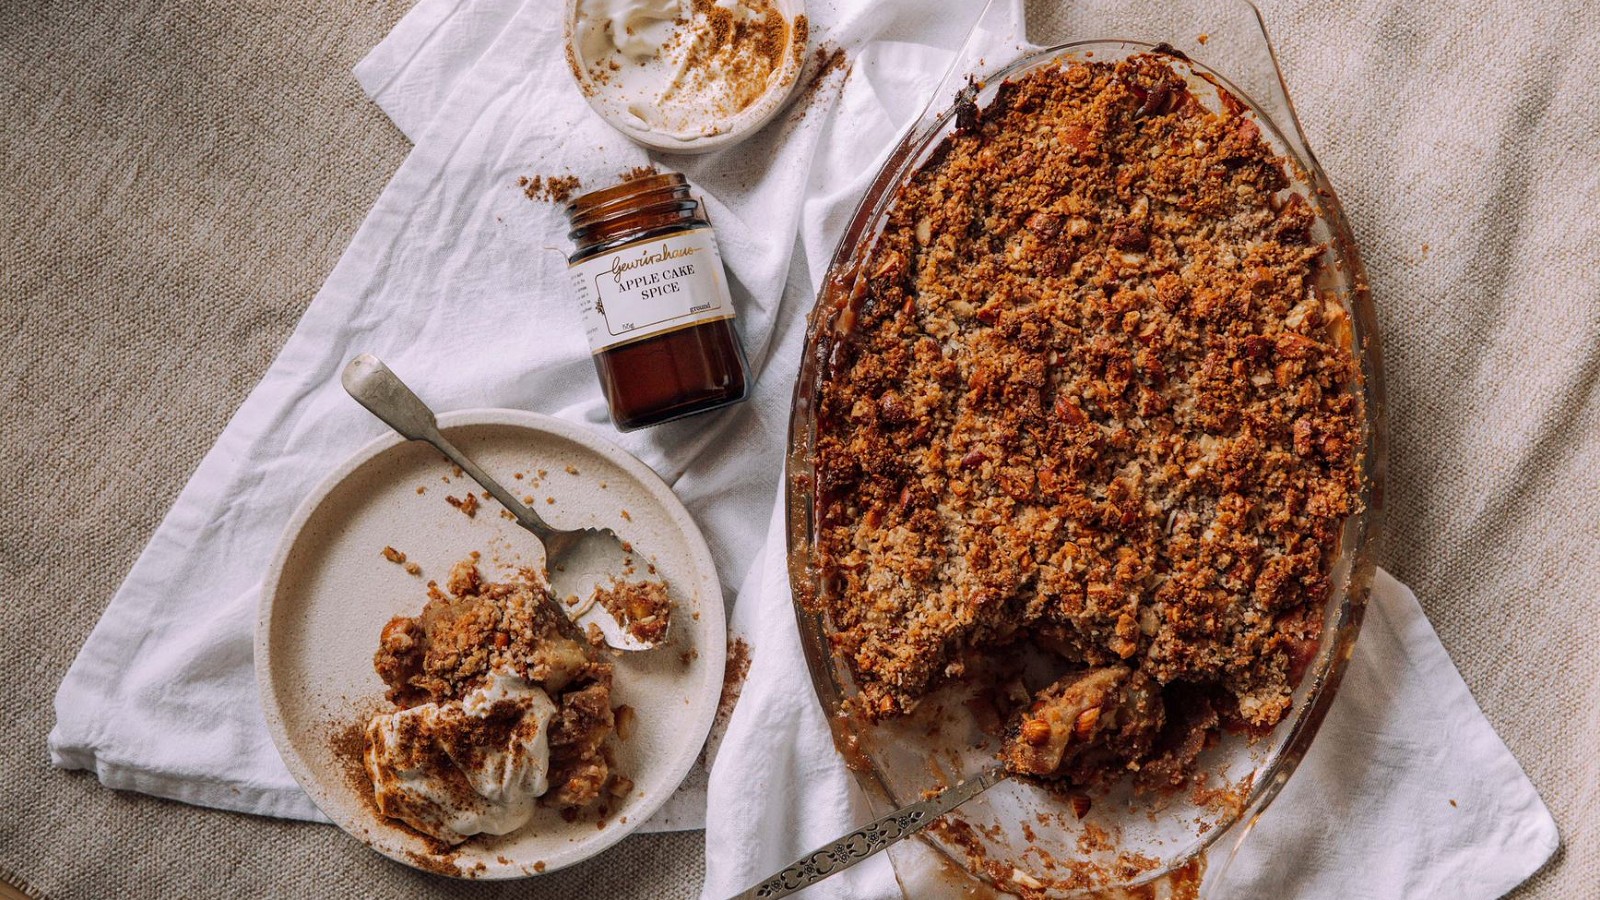 Image of Salted Caramel Apple Crumble